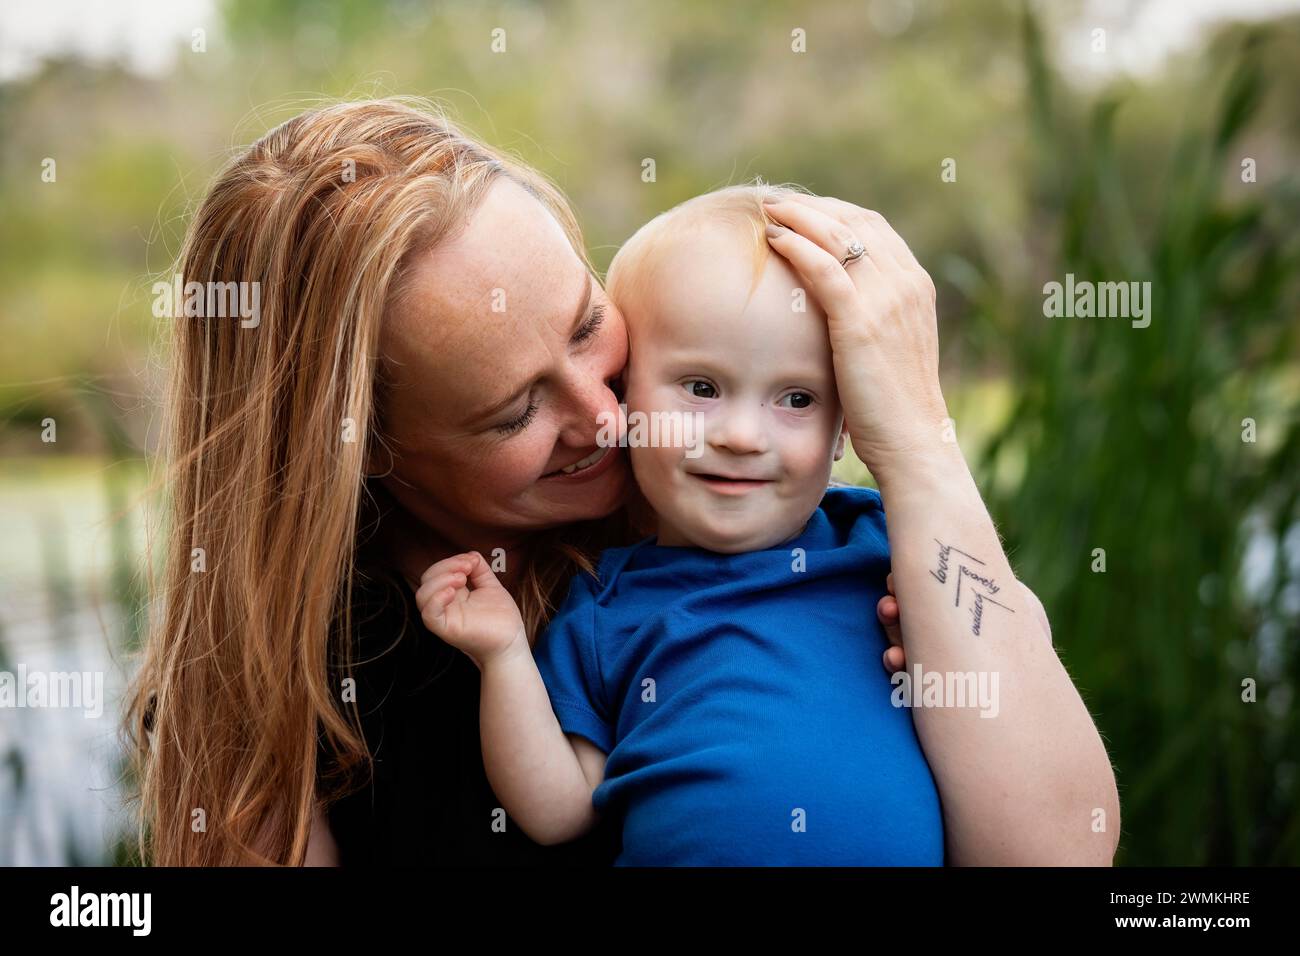 Outdoor portrait of a mother spending quality time with her son who has Down Syndrome in a city park during an autumn day; Leduc, Alberta, Canada Stock Photo